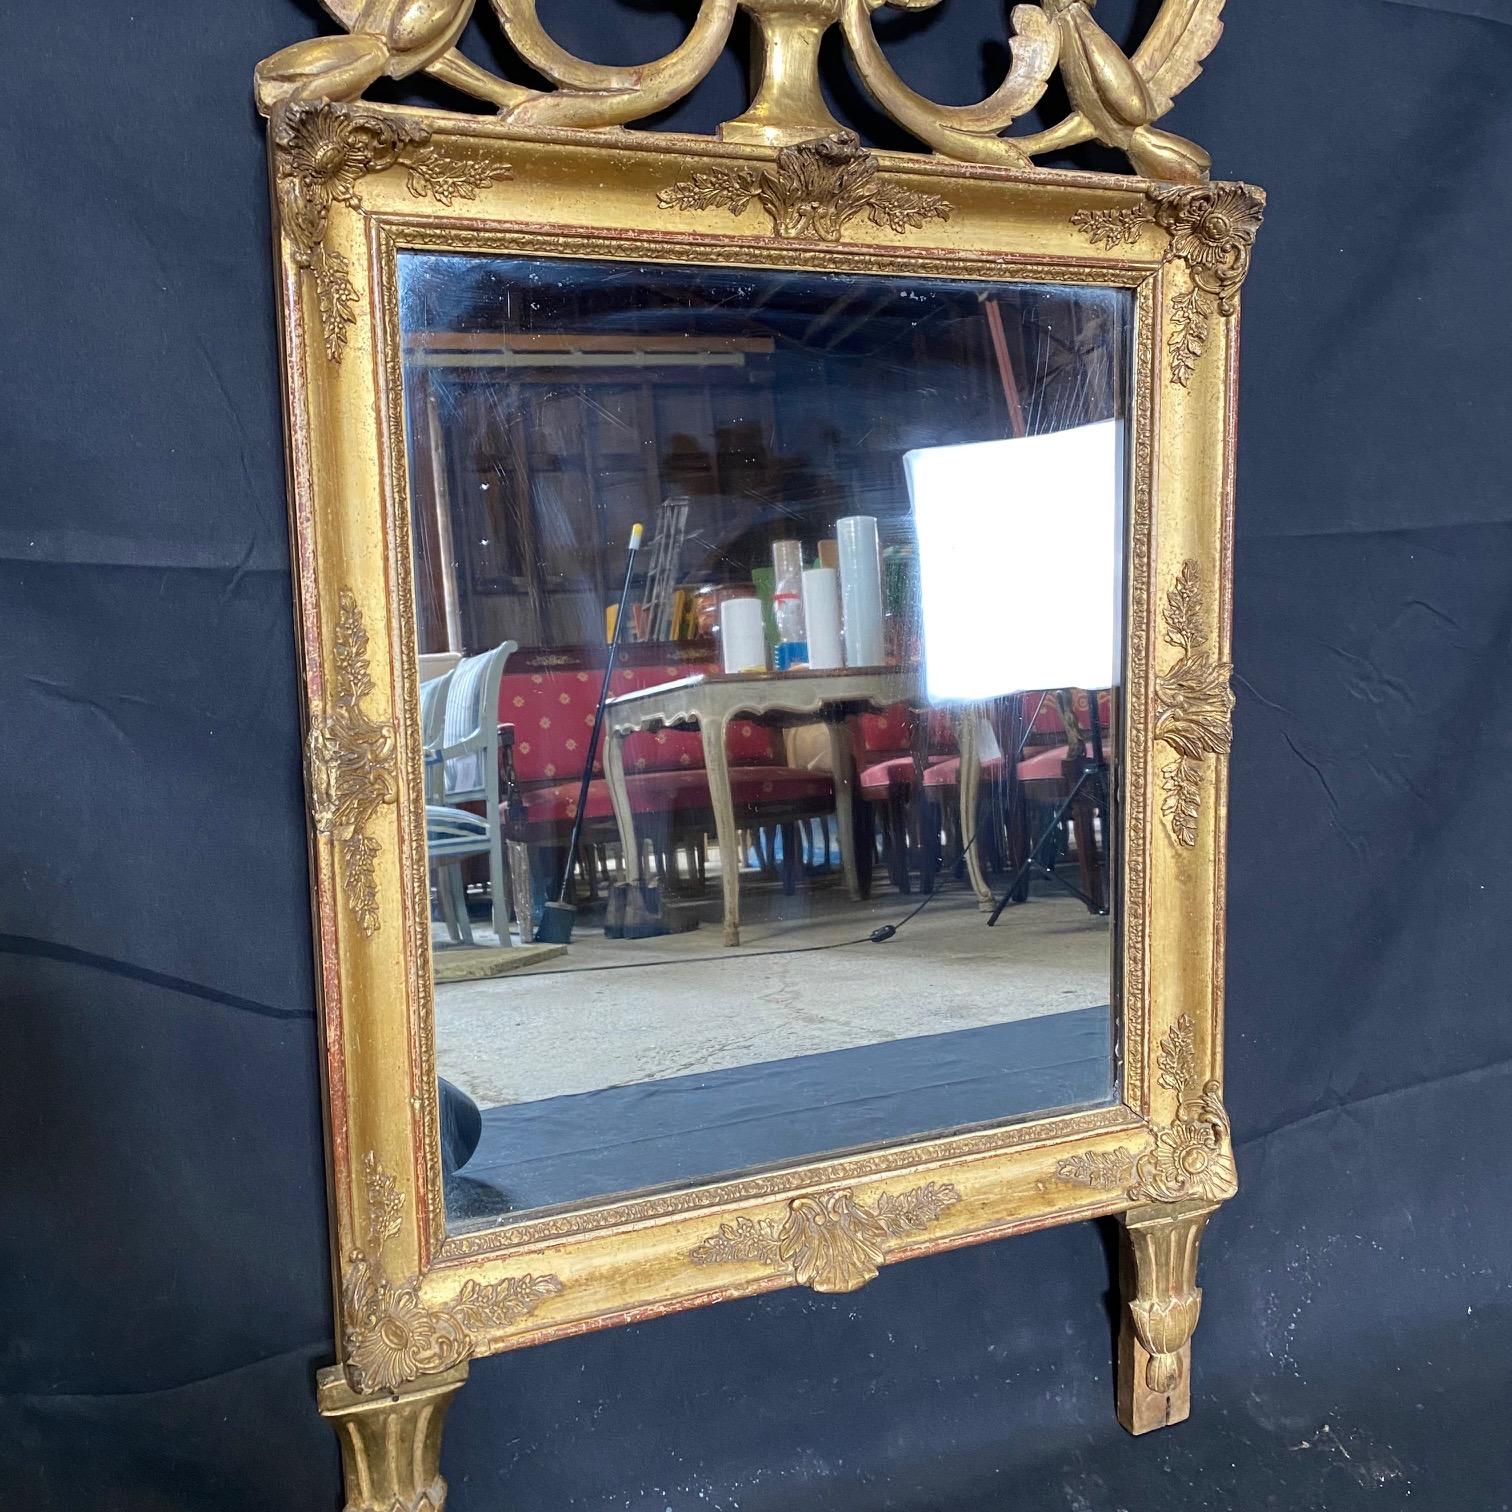 Rare Gem French Antique Louis XVI Mirror with Intricate Fronton Carving  For Sale 5